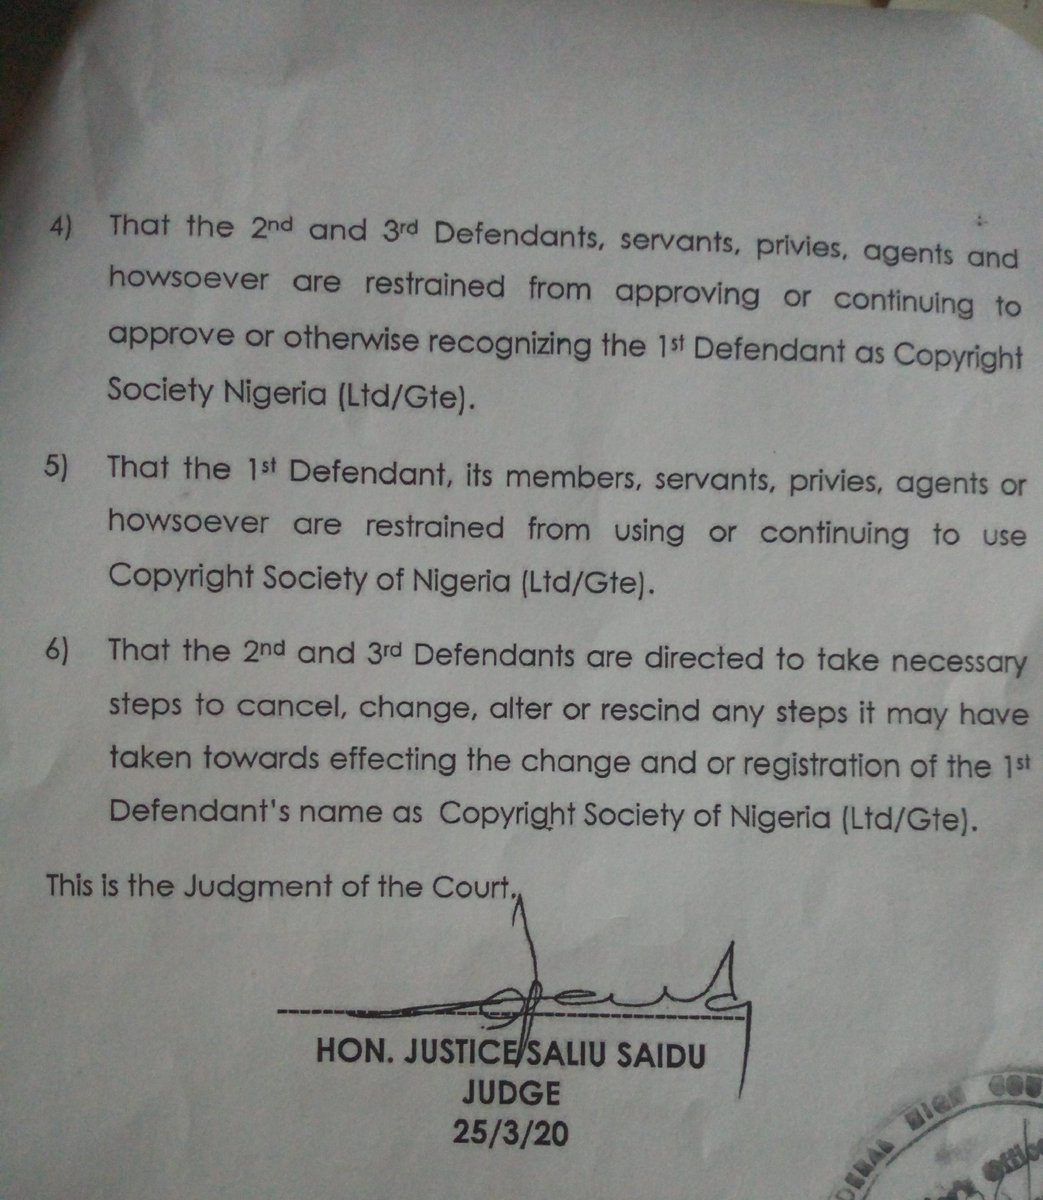 MCSN v  @COSONNG & ors. delivered by the Nigerian Fed. H. Crt 25/3/2020. Among others, the judgment directs the Corporate Affairs Commission to remind the registration of the name Copyright Society of Nigeria Ltd/Gte & restrains COSON from using the name. COSON has appeald ... 1